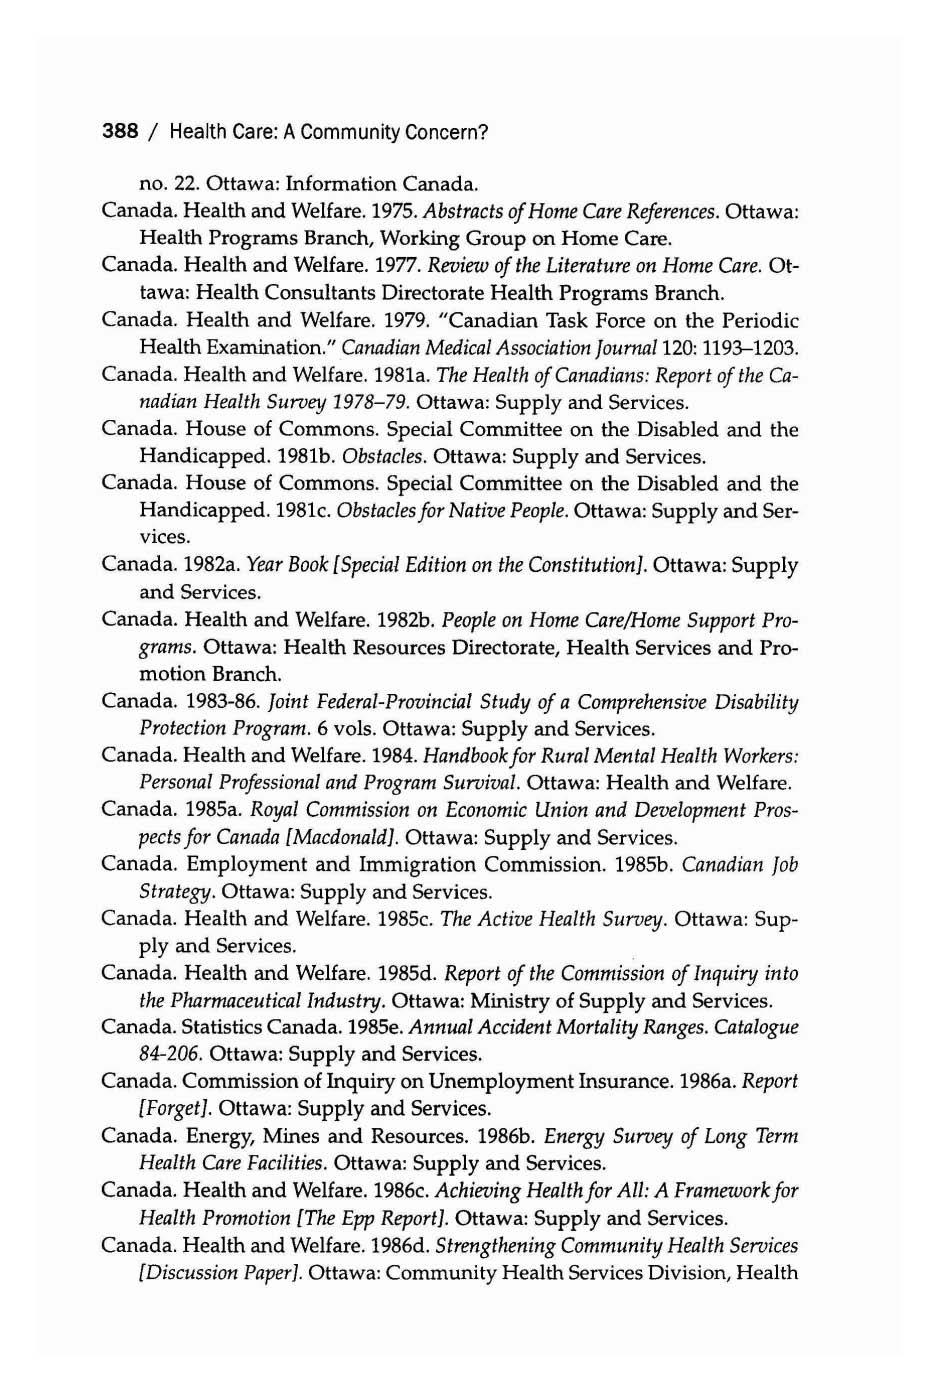 388 / Health Care: A Community Concern? no. 22. Ottawa: Information Canada. Canada. Health and Welfare. 1975. Abstracts ofhome Care References.